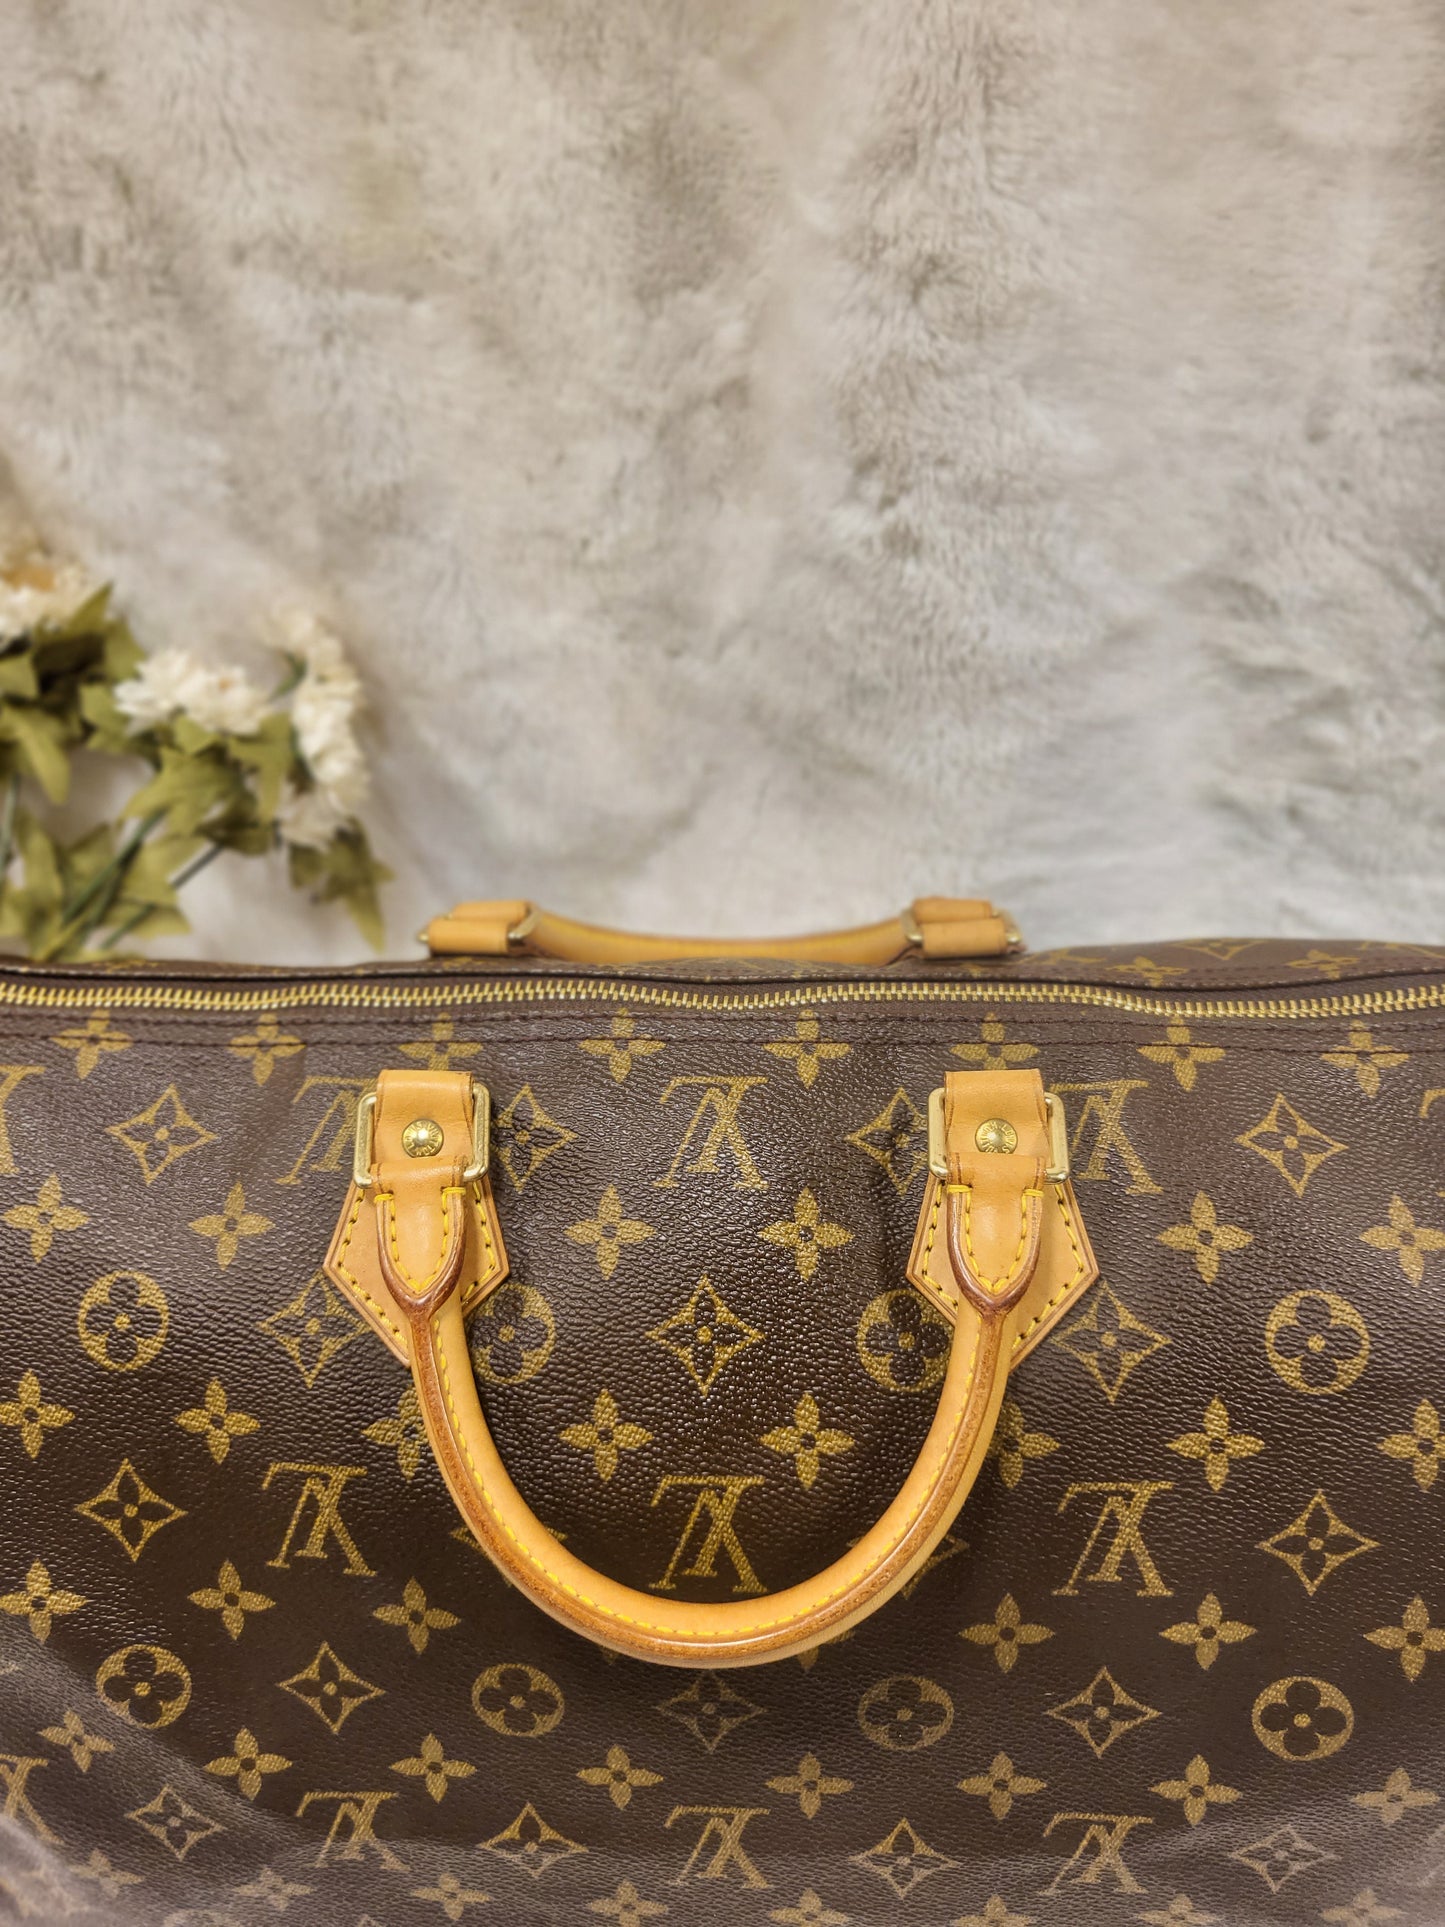 Authentic pre-owned Louis Vuitton speedy 40